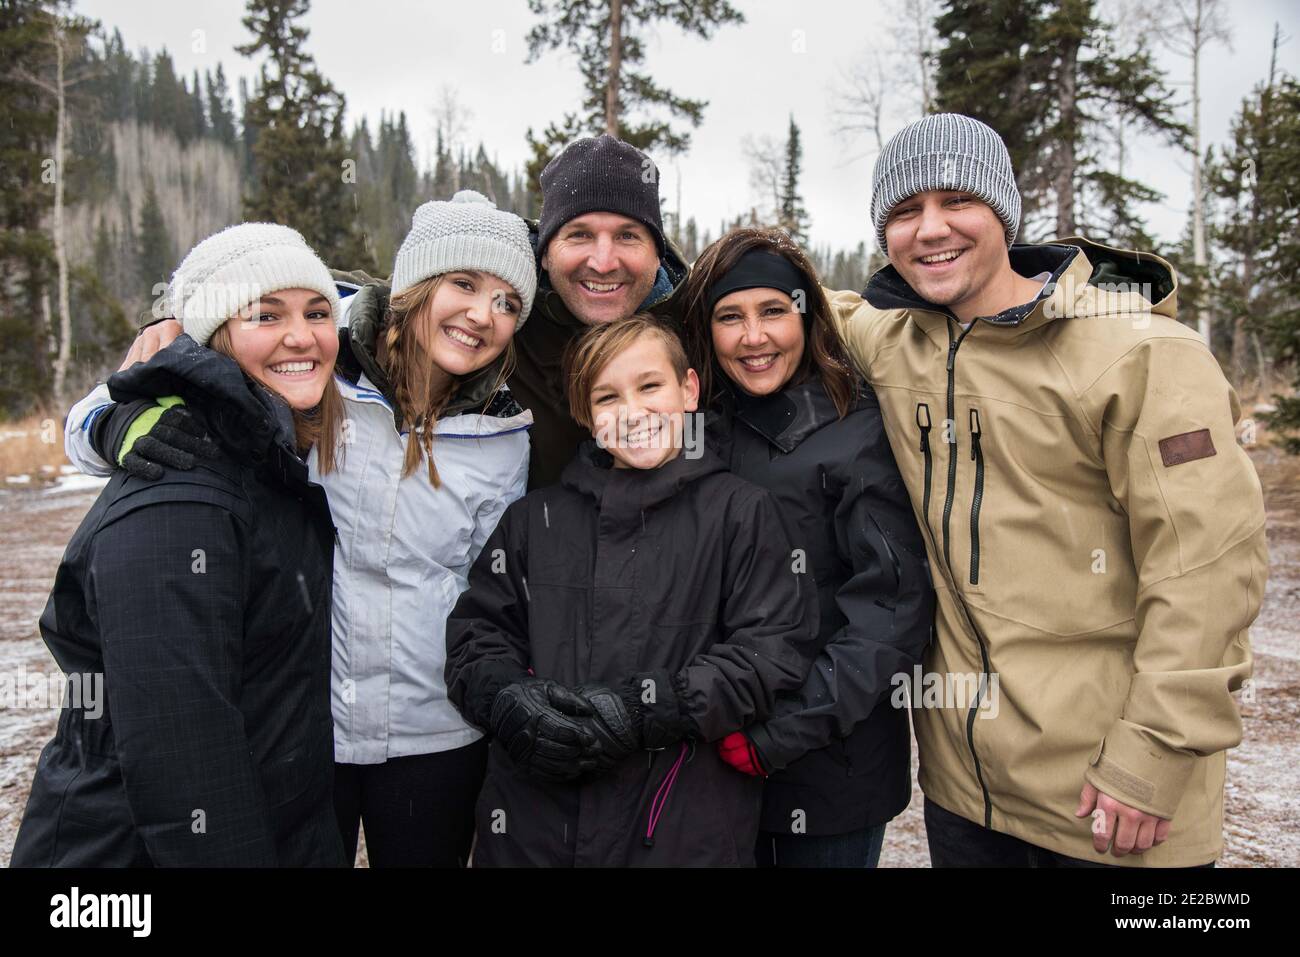 Family togetherness on a winter outing.  A simple, and informal portrait while enjoying a winter excursion. Stock Photo